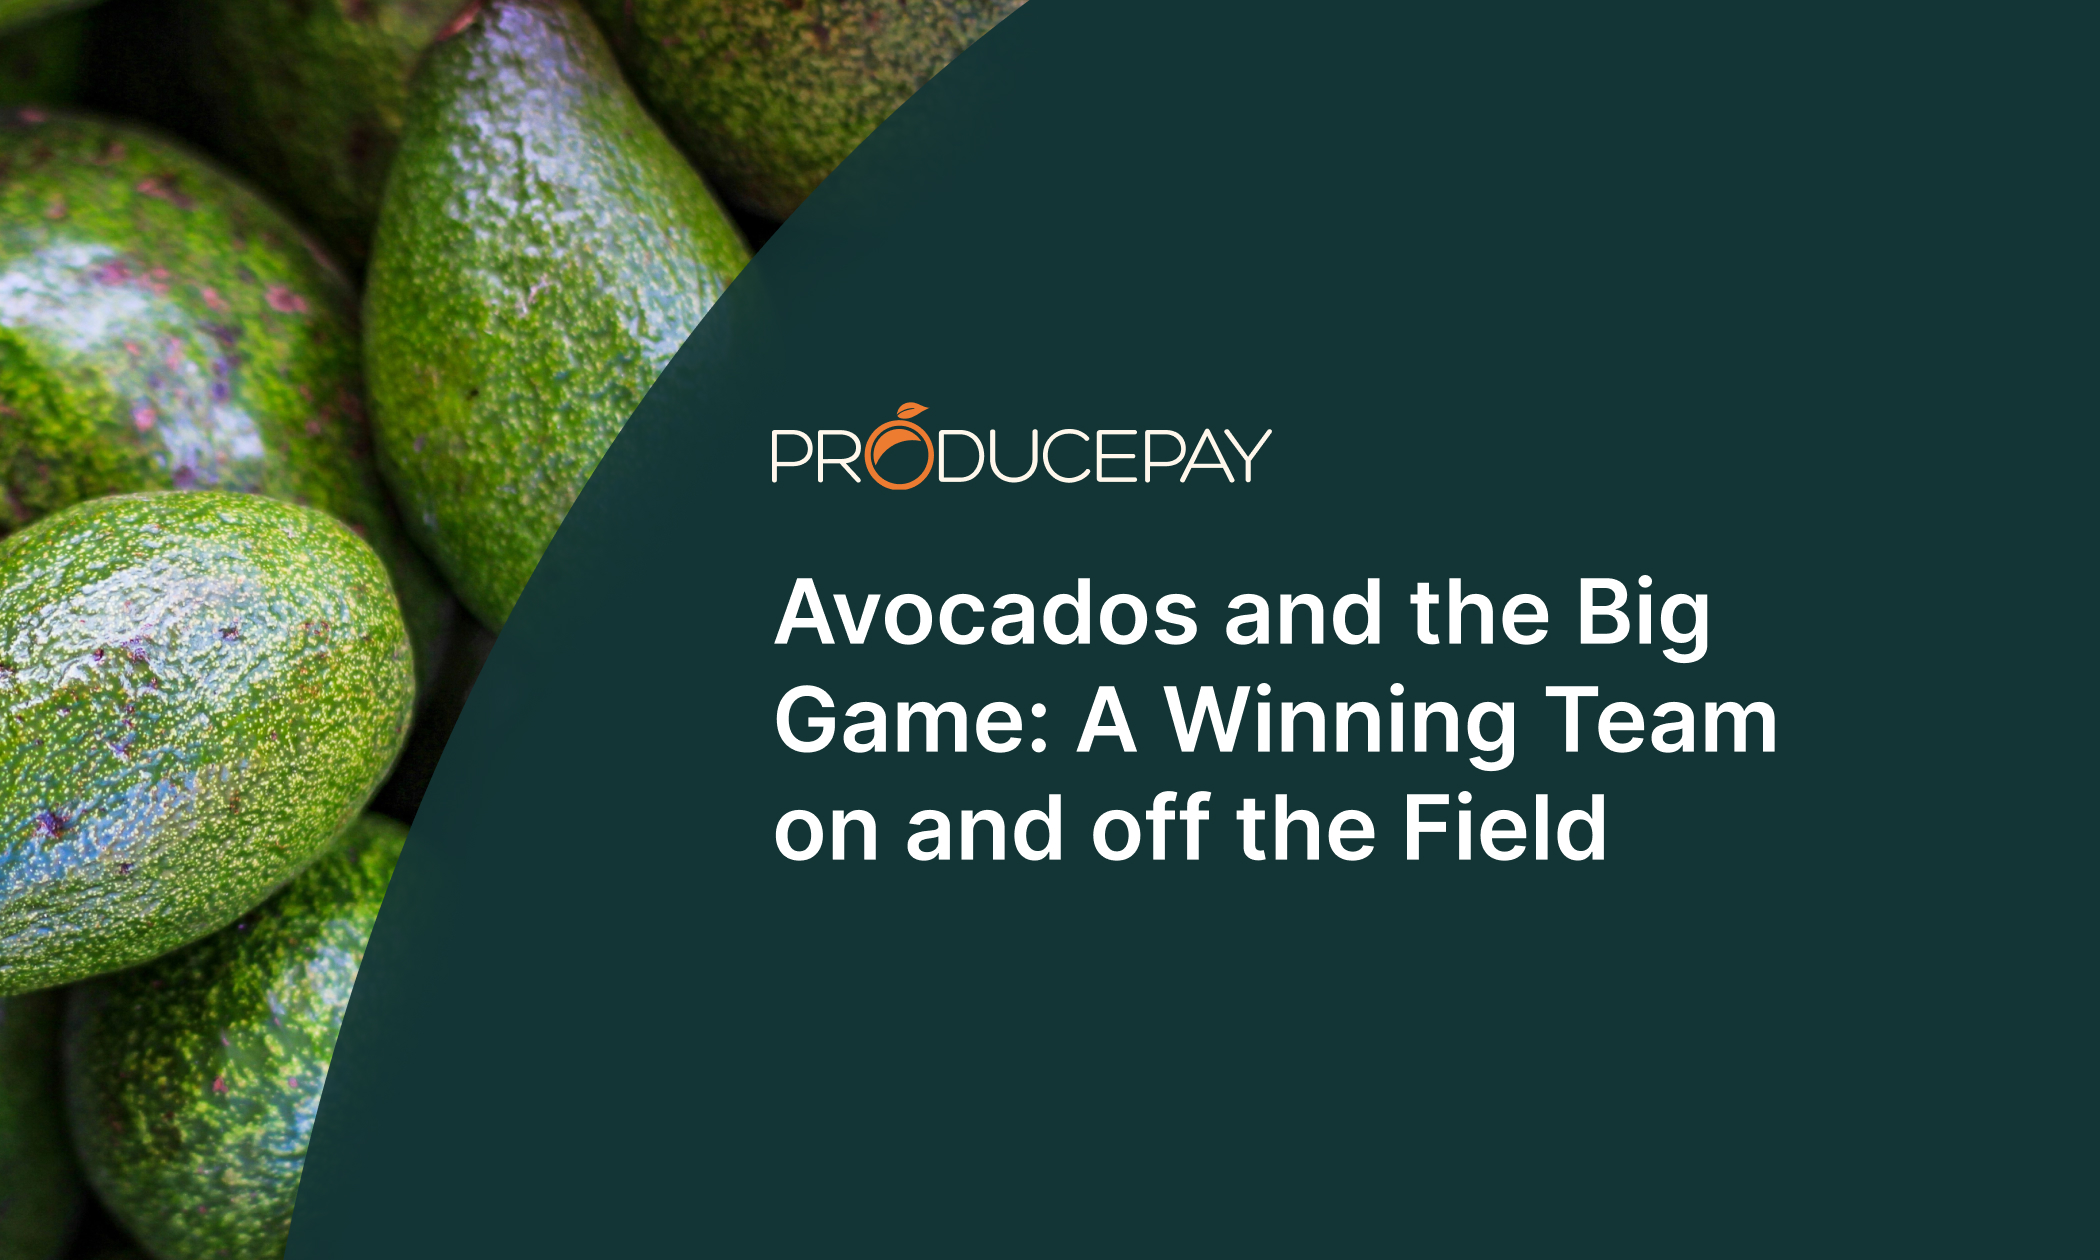 EN – Avocados and the Big Game